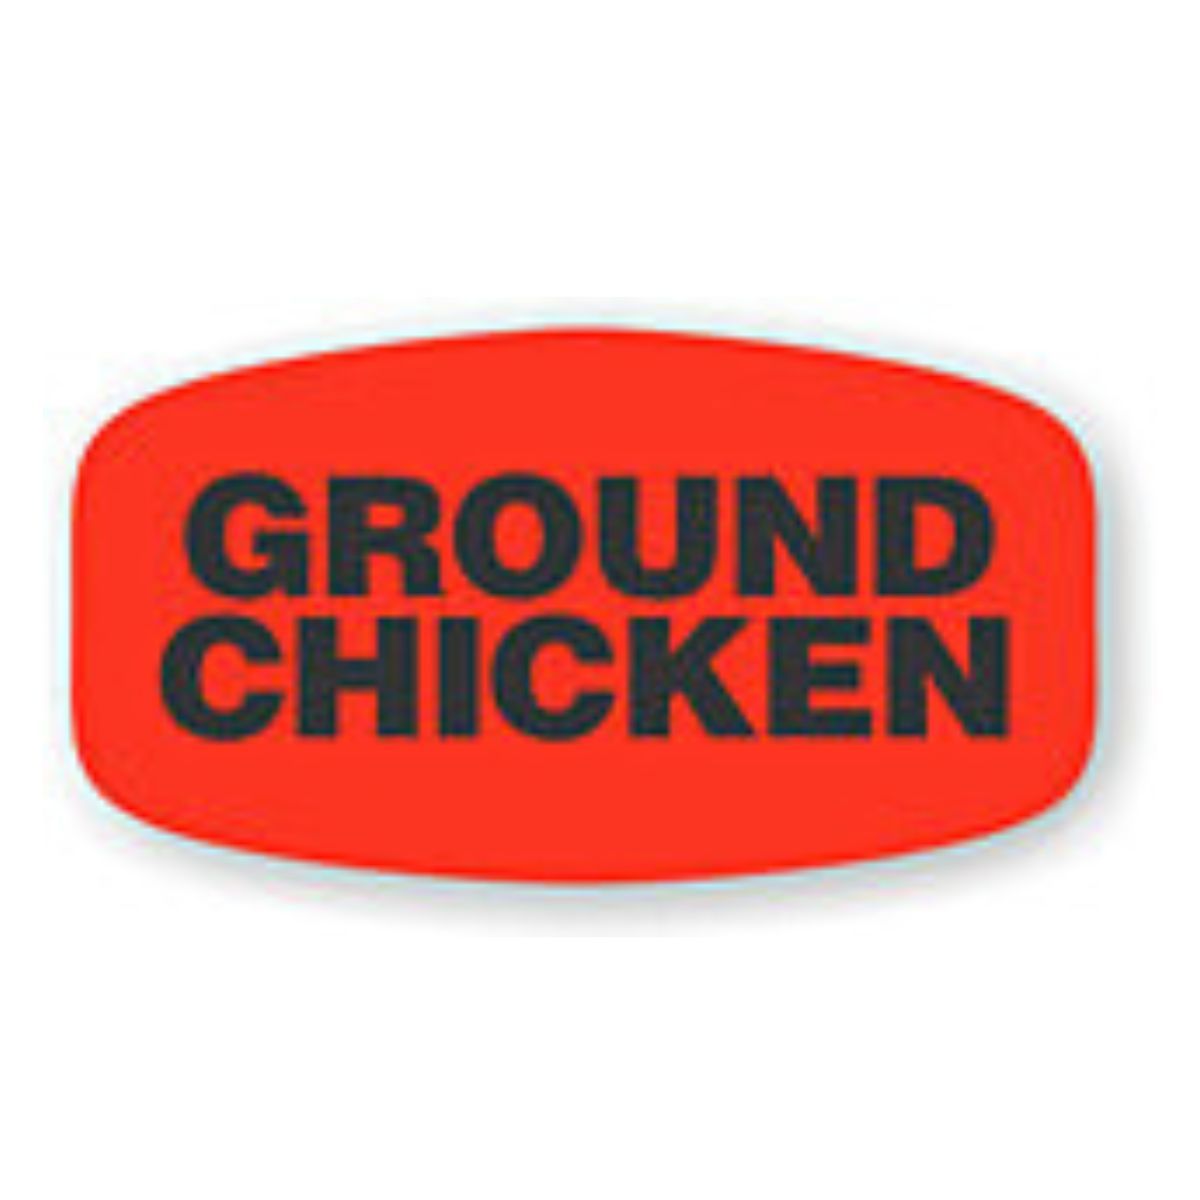 Bollin Label 12879 - Ground Chicken Black On Red Short Oval - Roll of 1000